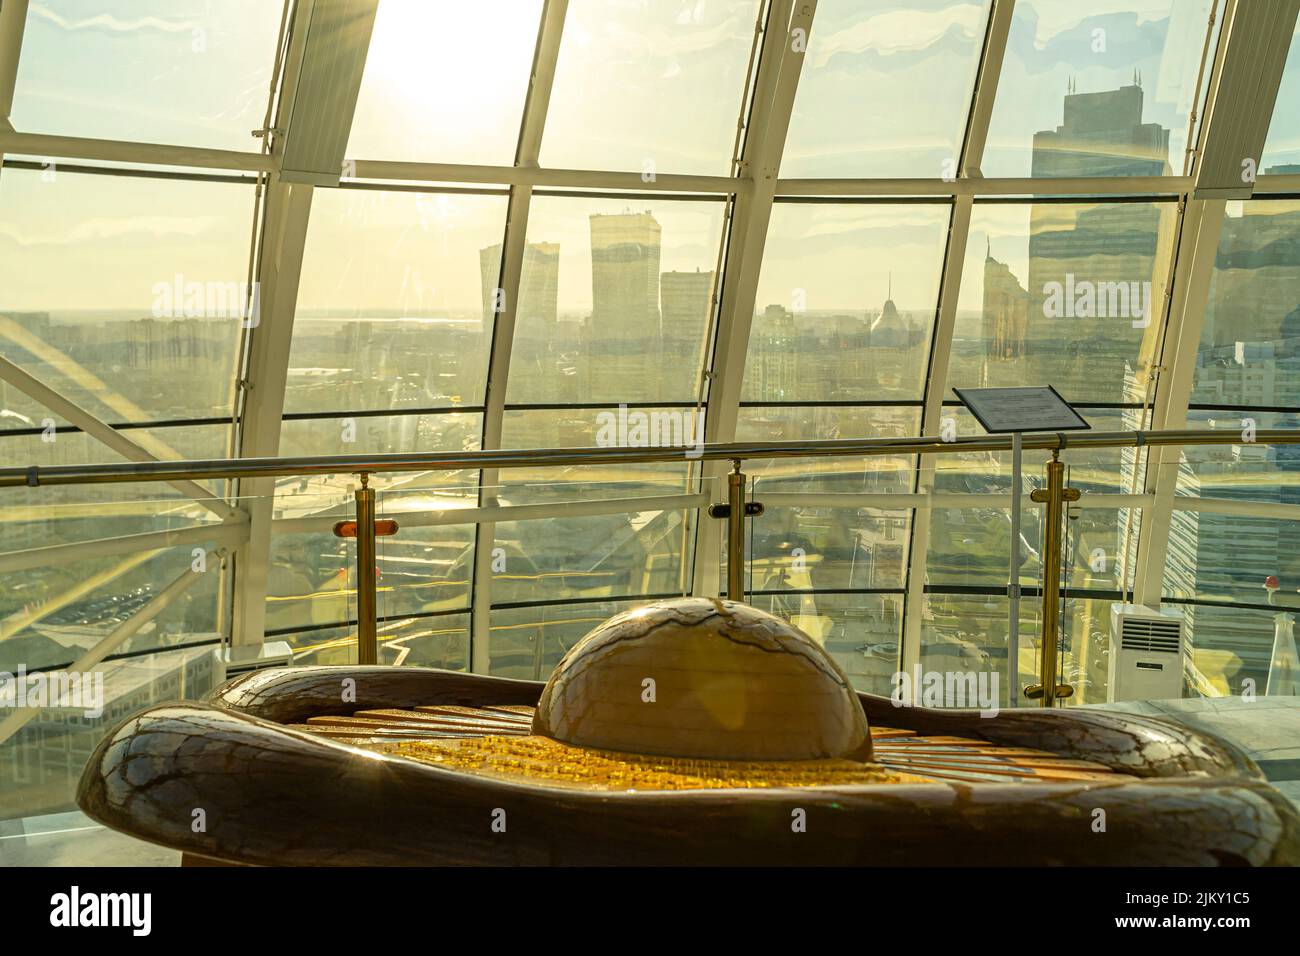 A wooden sculpture of a globe and 16 radiating segments, commemorating world religions. Bayterek Tower, Nur-Sultan, Qazaqstan Stock Photo